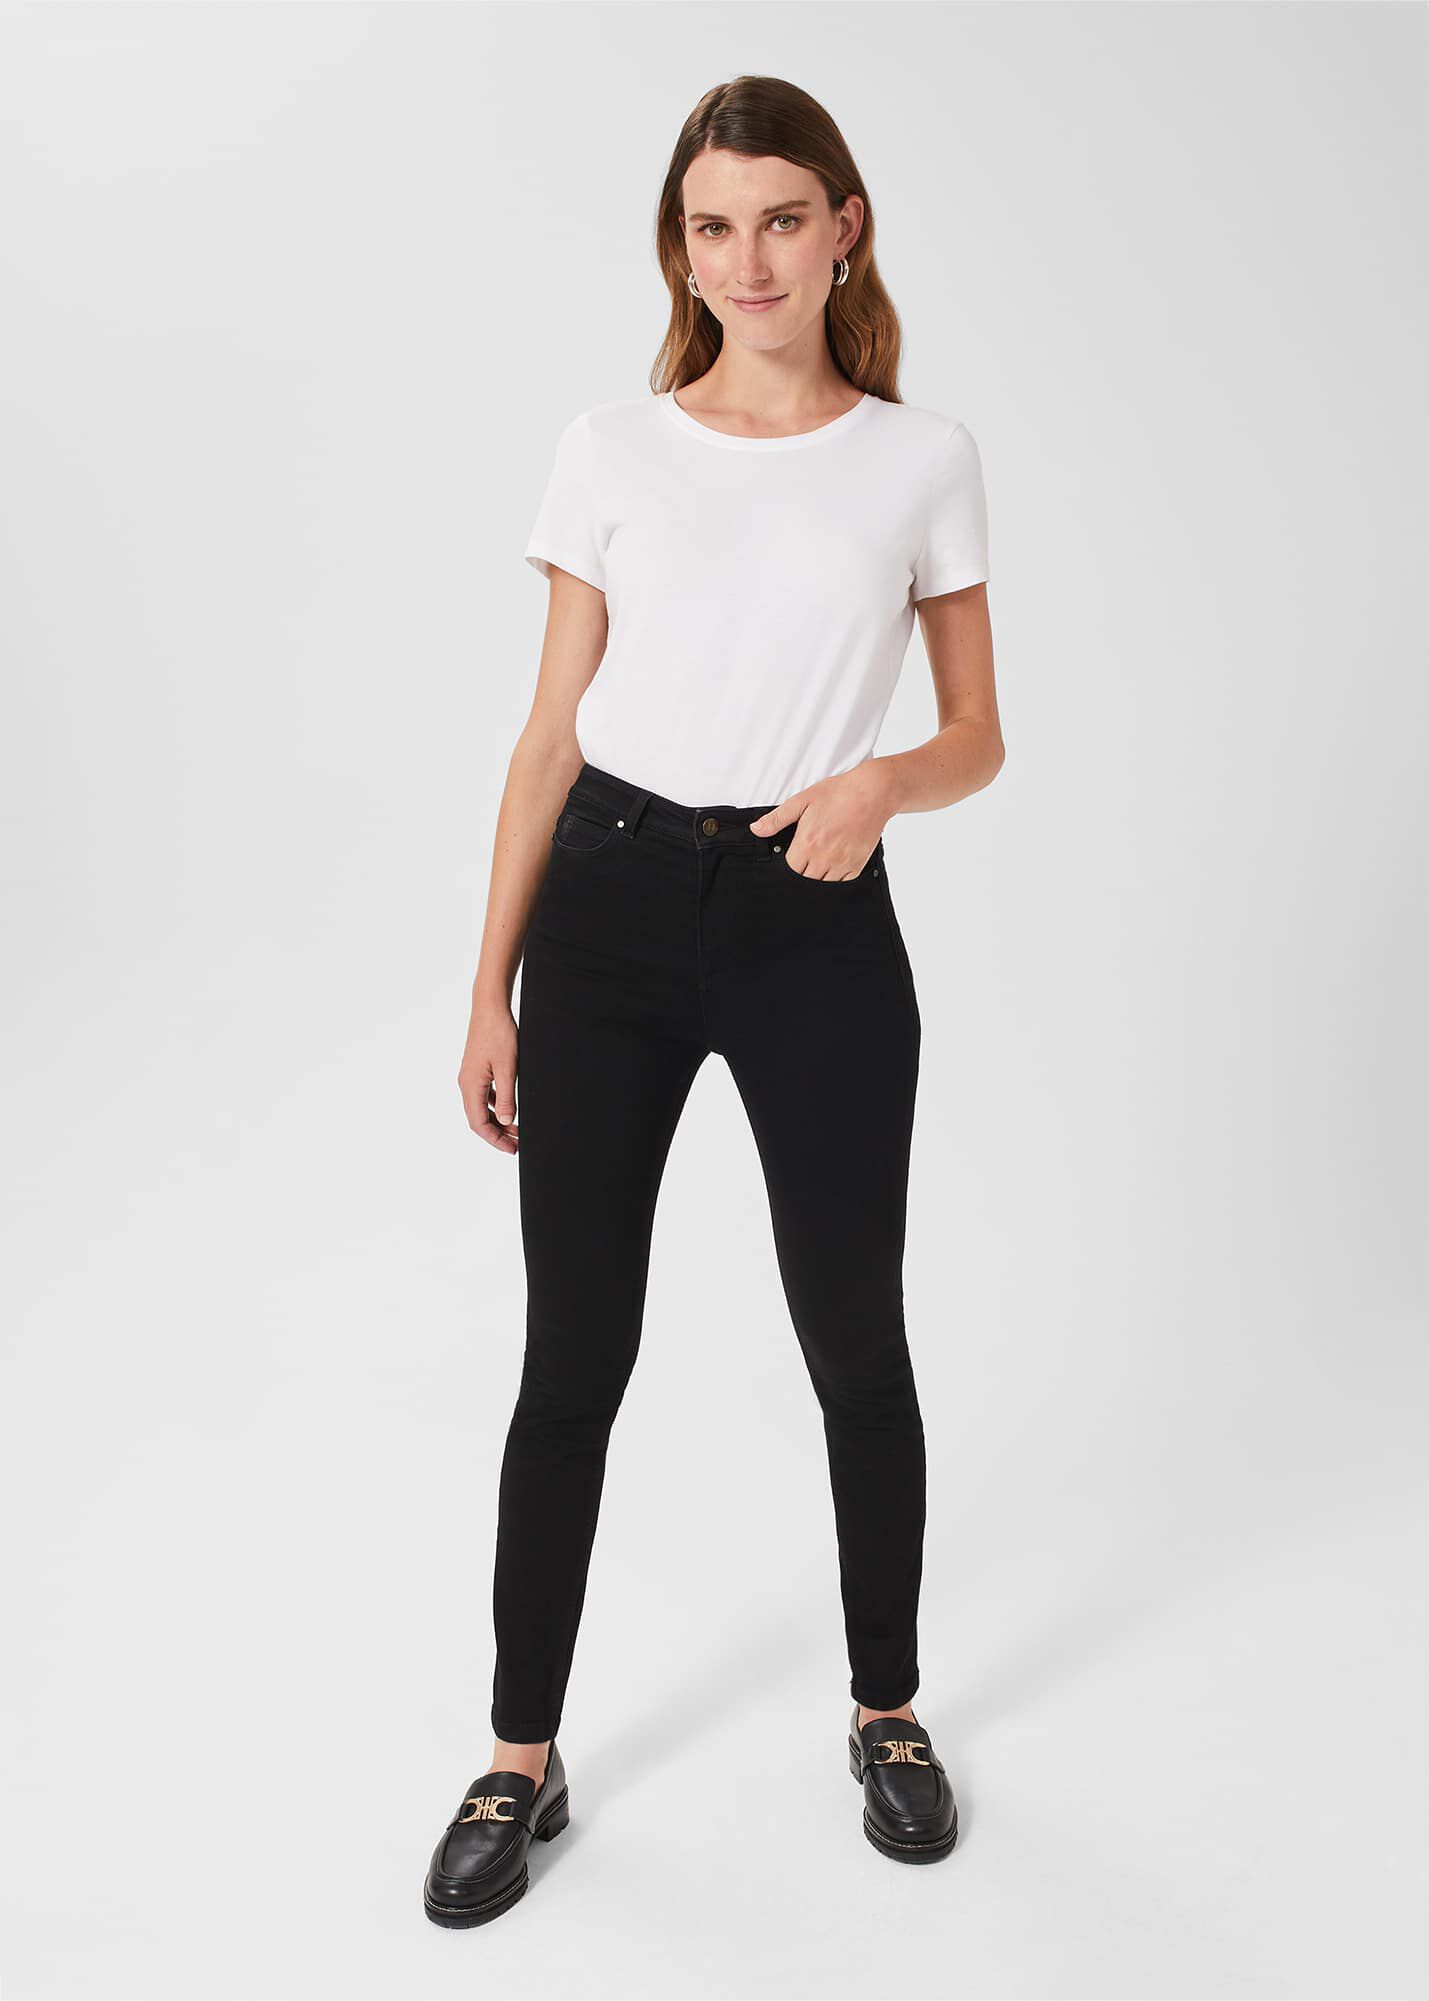 River Island Skinny Trousers Petite Black Faux Leather | Lyst UK